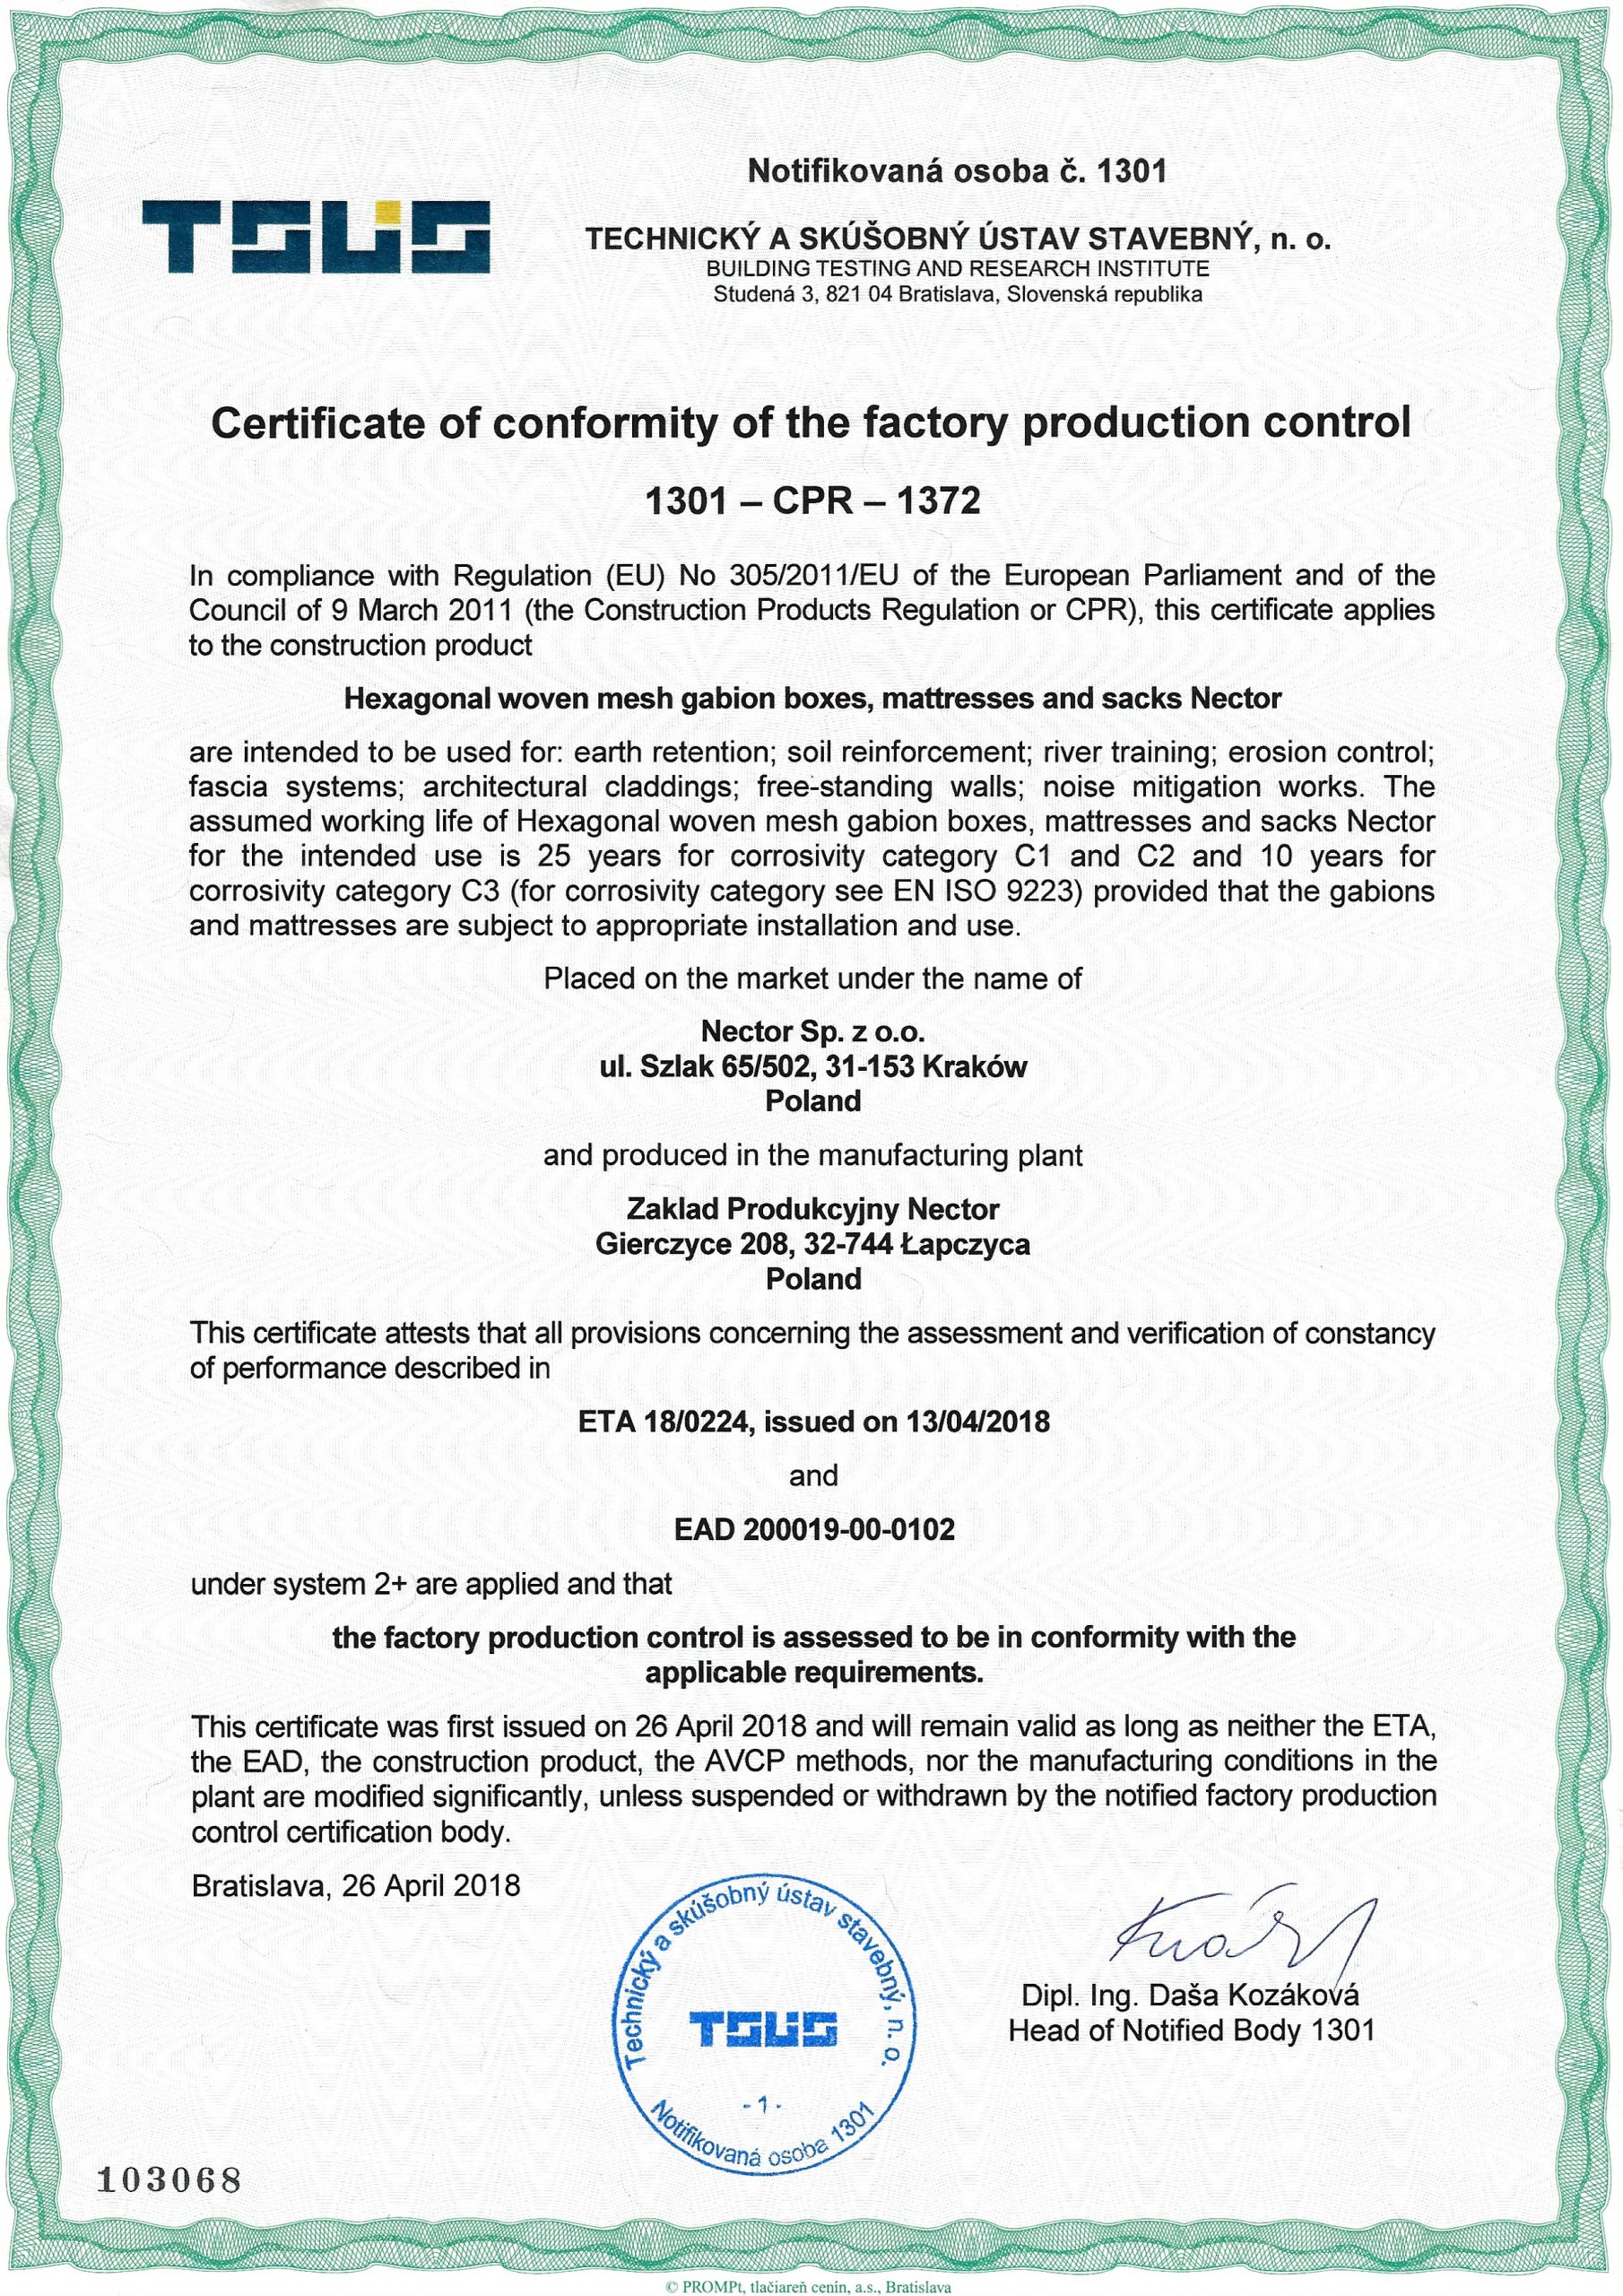 Certificate of Conformity of the factory production control 1301-CPR-1372